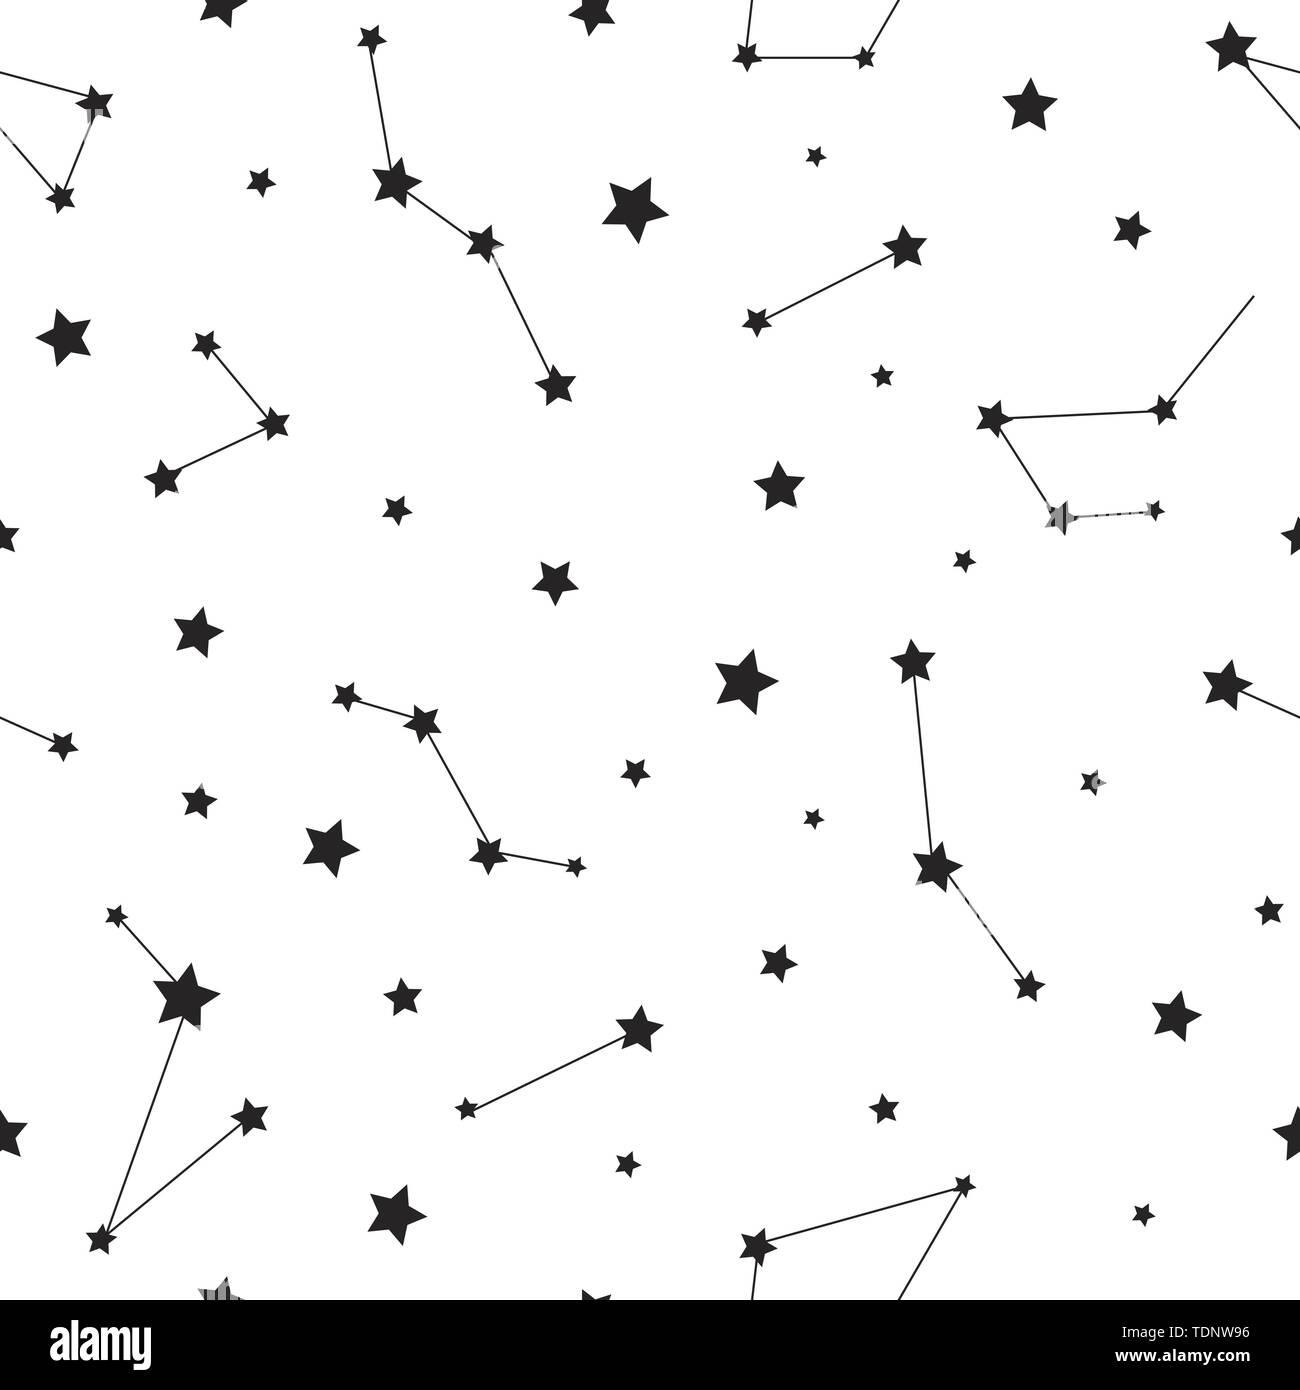 Seamless pattern with black constellations and stars on white background. Vector illustration. Night sky, universe, space. Galaxy background. Cosmos t Stock Vector